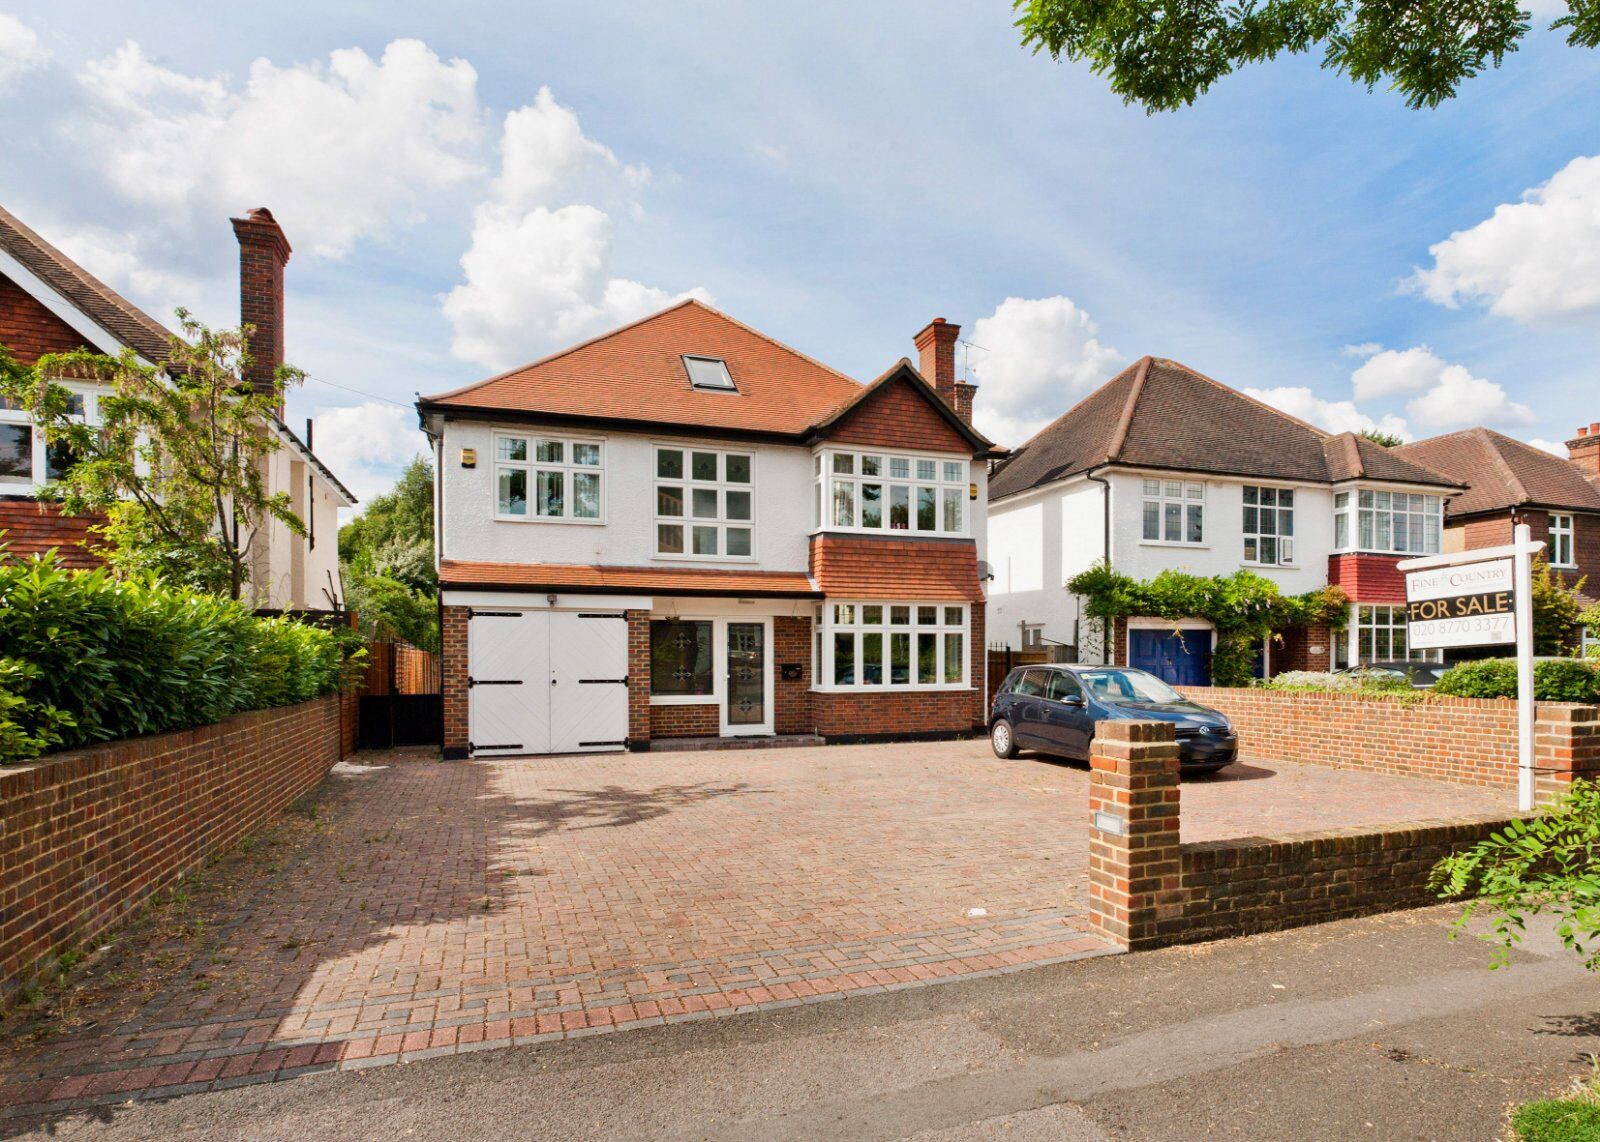 5 bedroom detached house for sale West Drive, South Cheam, SM2, main image